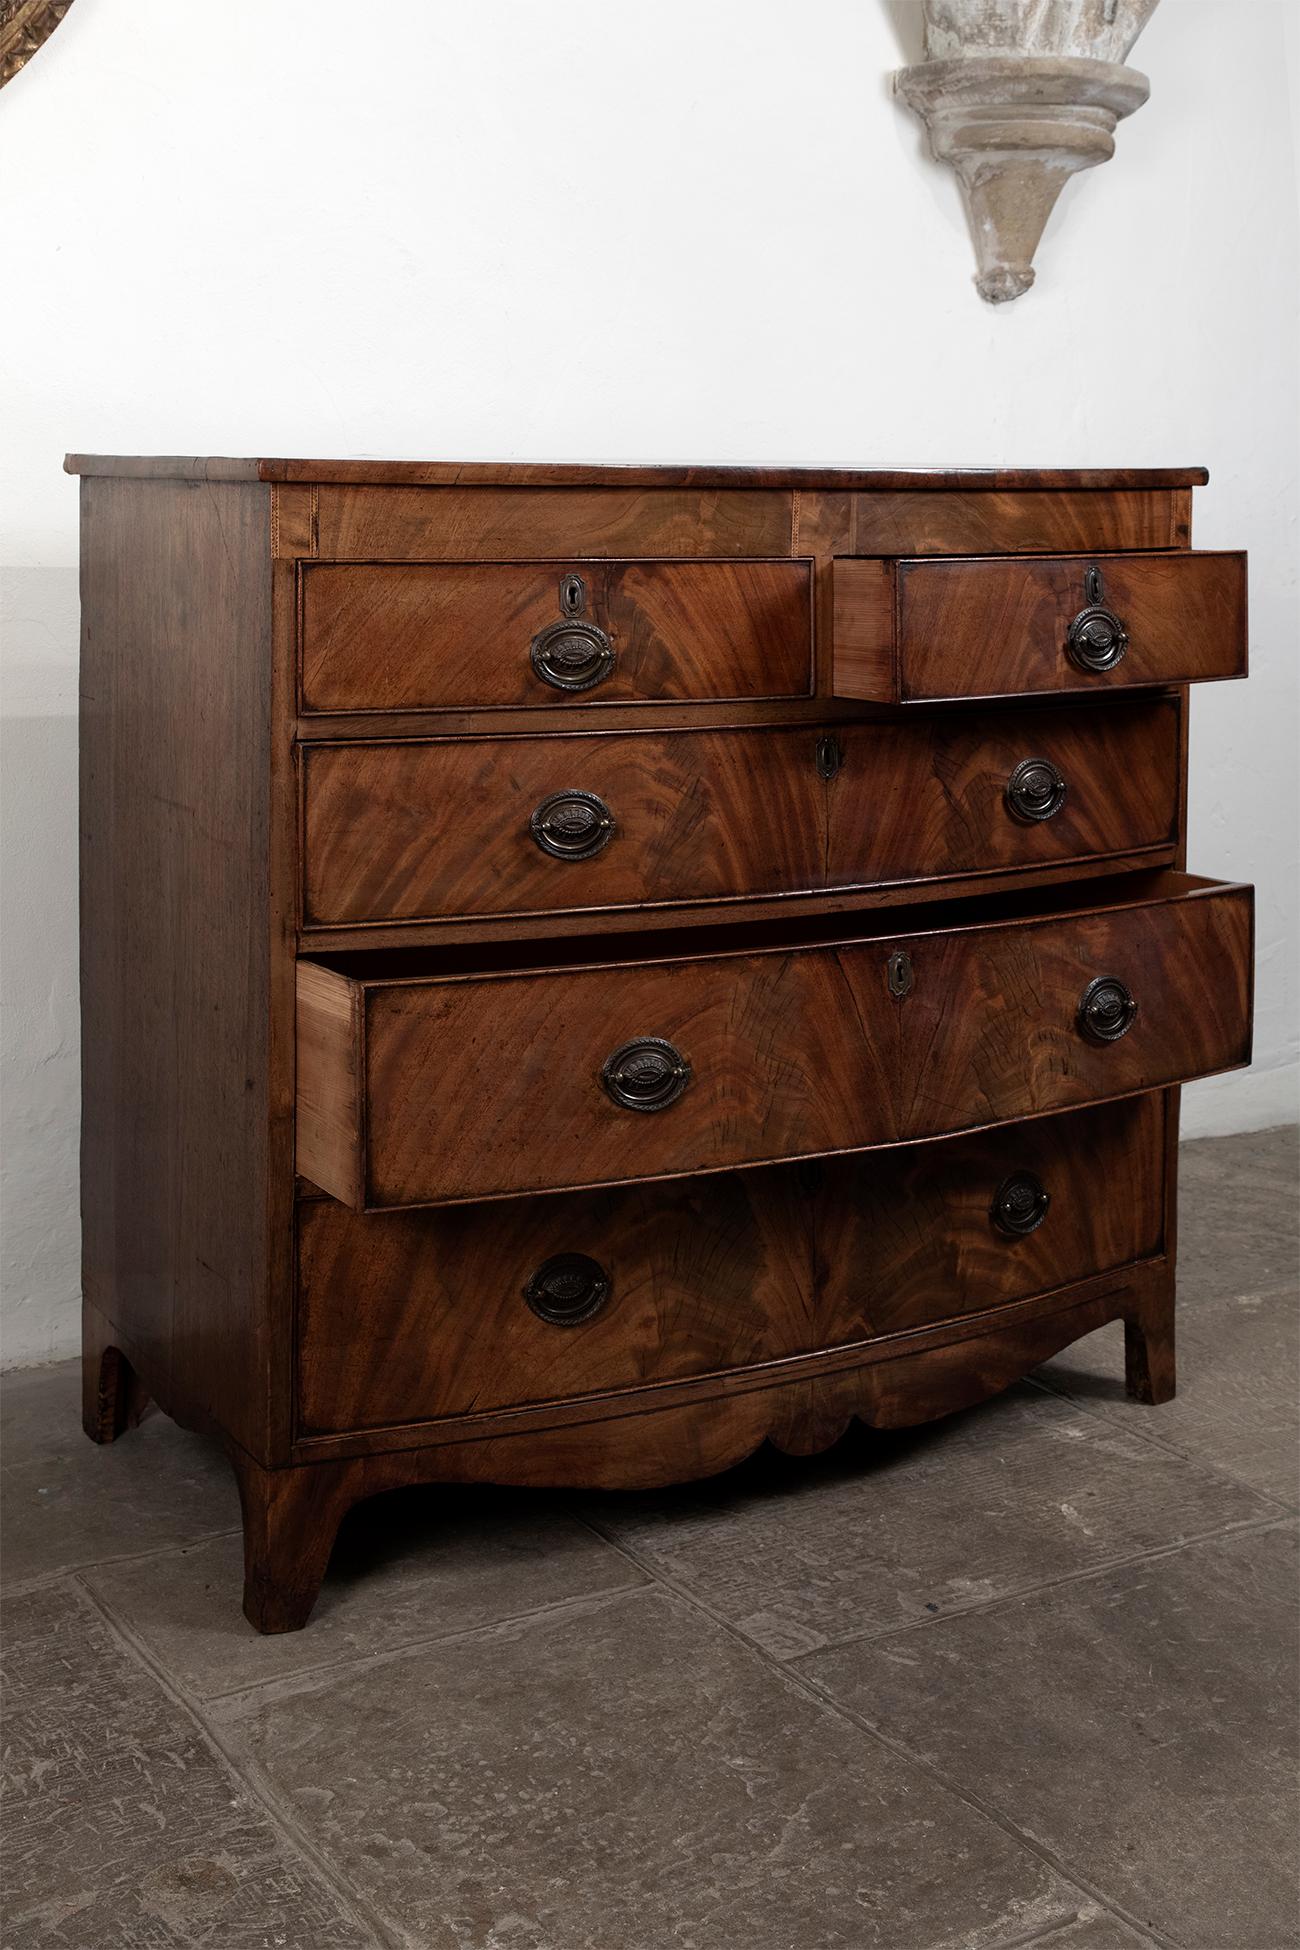 British George III Bow Fronted Flame Mahogany Chest, circa 1790